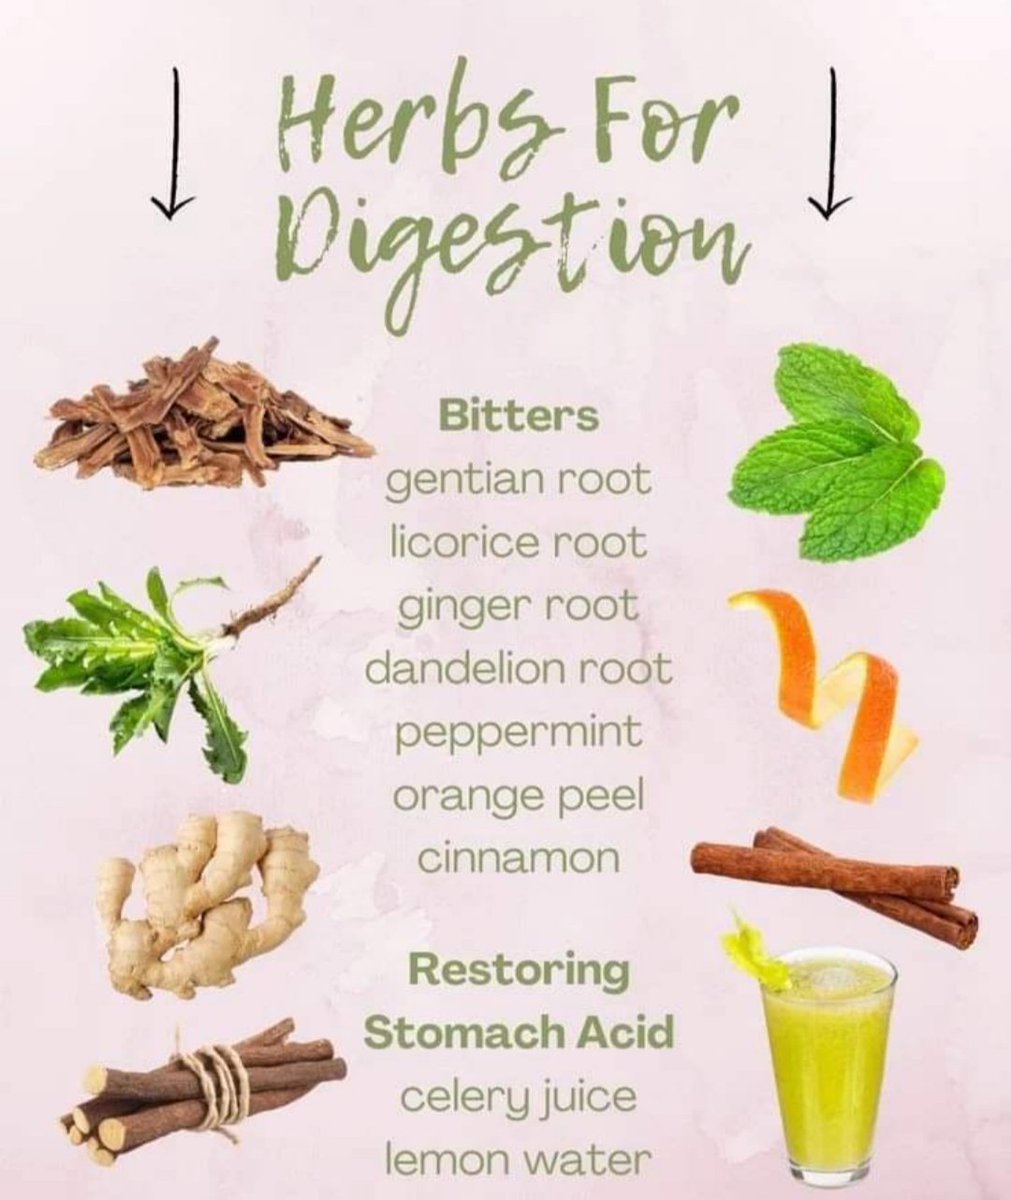 Amazing herbs with Amazing benefits ☘️🌿Herbs for digestion 🌿 #herbs #organic #vegan #health #natural #nature #herbalmedicine #plantbased #healthylifestyle #herbal #healing #plants #detox #healthy #food #wellness #healthyfood  #holistichealth #guthealth #digestion